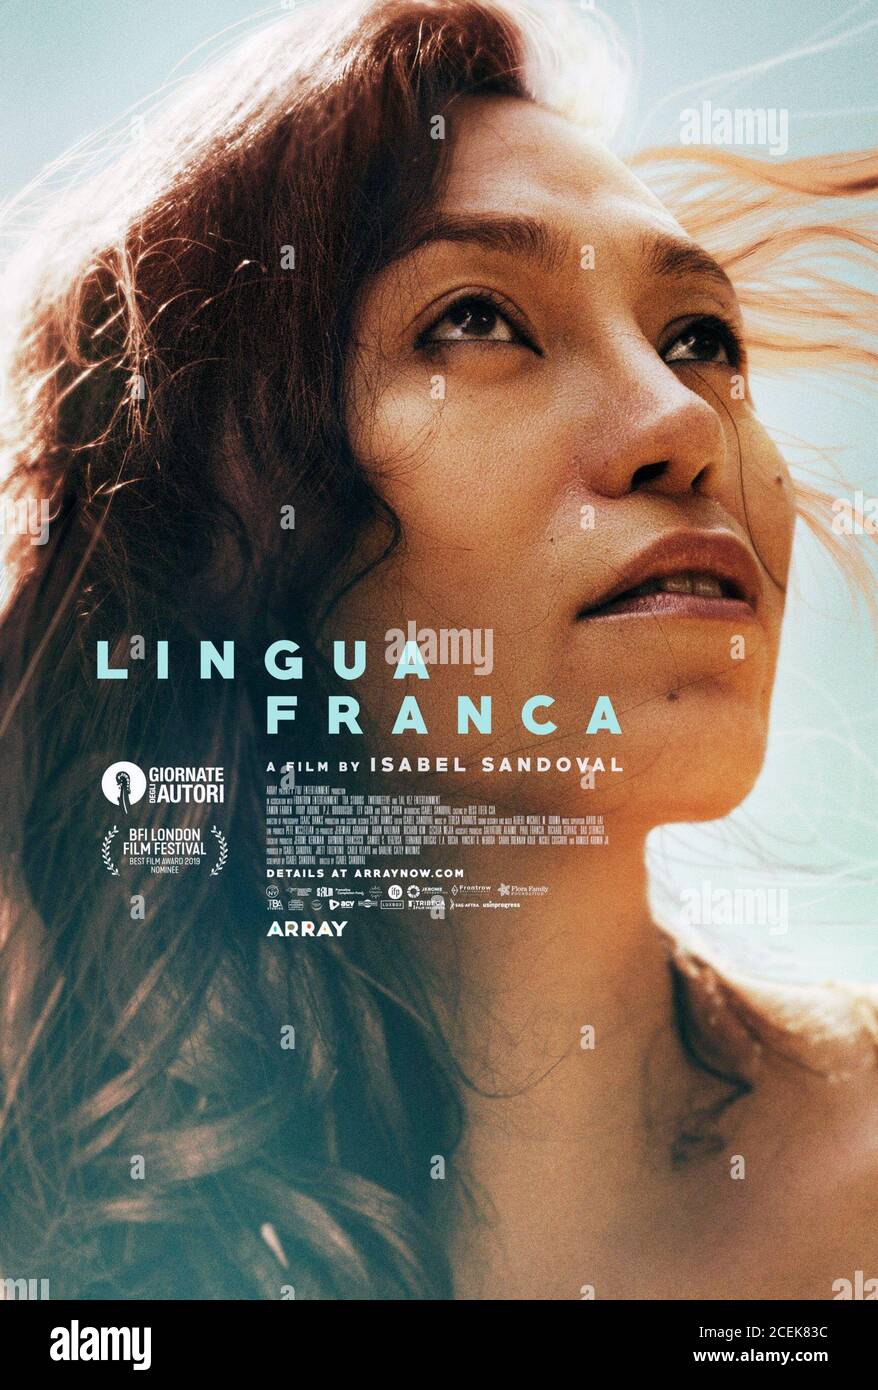 LINGUA FRANCA, US poster, Isabel Sandoval, 2019. © Array Releasing / Courtesy Everett Collection Stock Photo